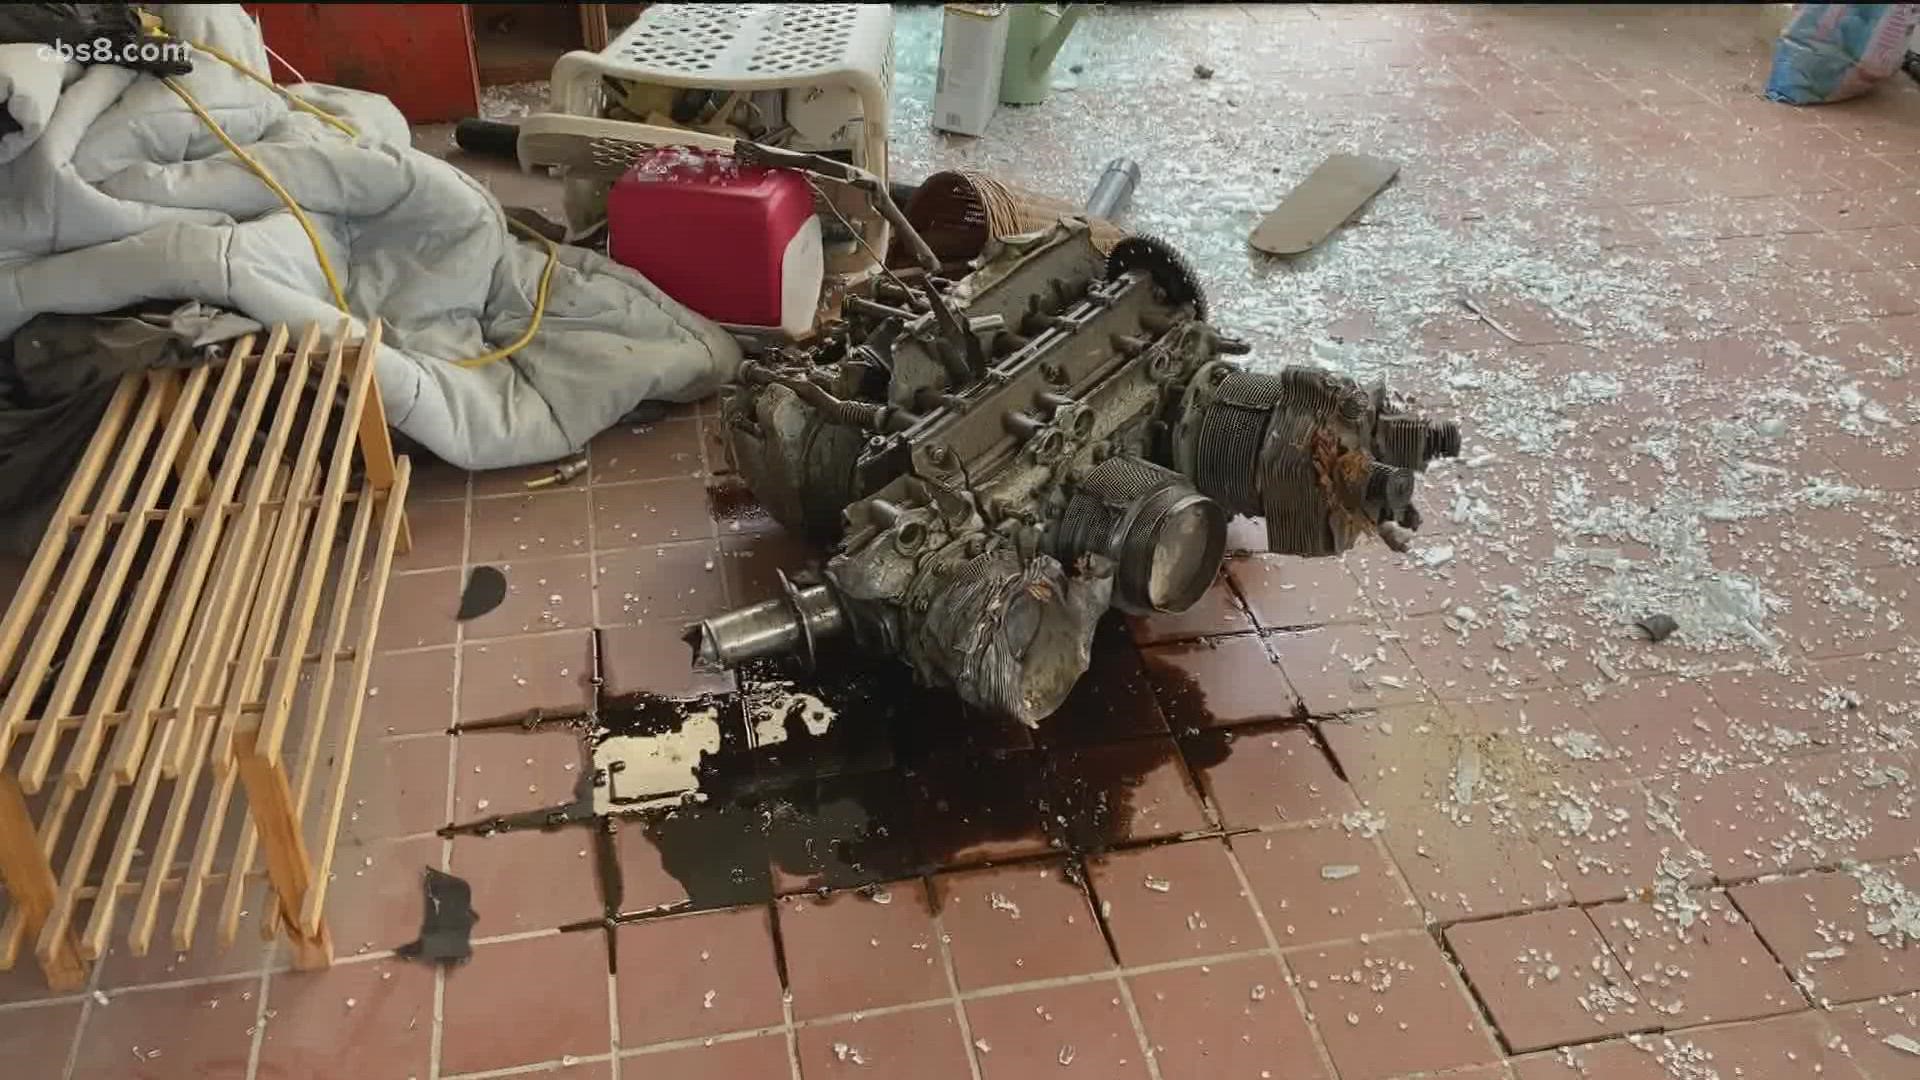 One resident had an engine end up in his sunroom and found an oil plug, a sensor, a control knob, and ducting that appear to be from the plane, but also other items.